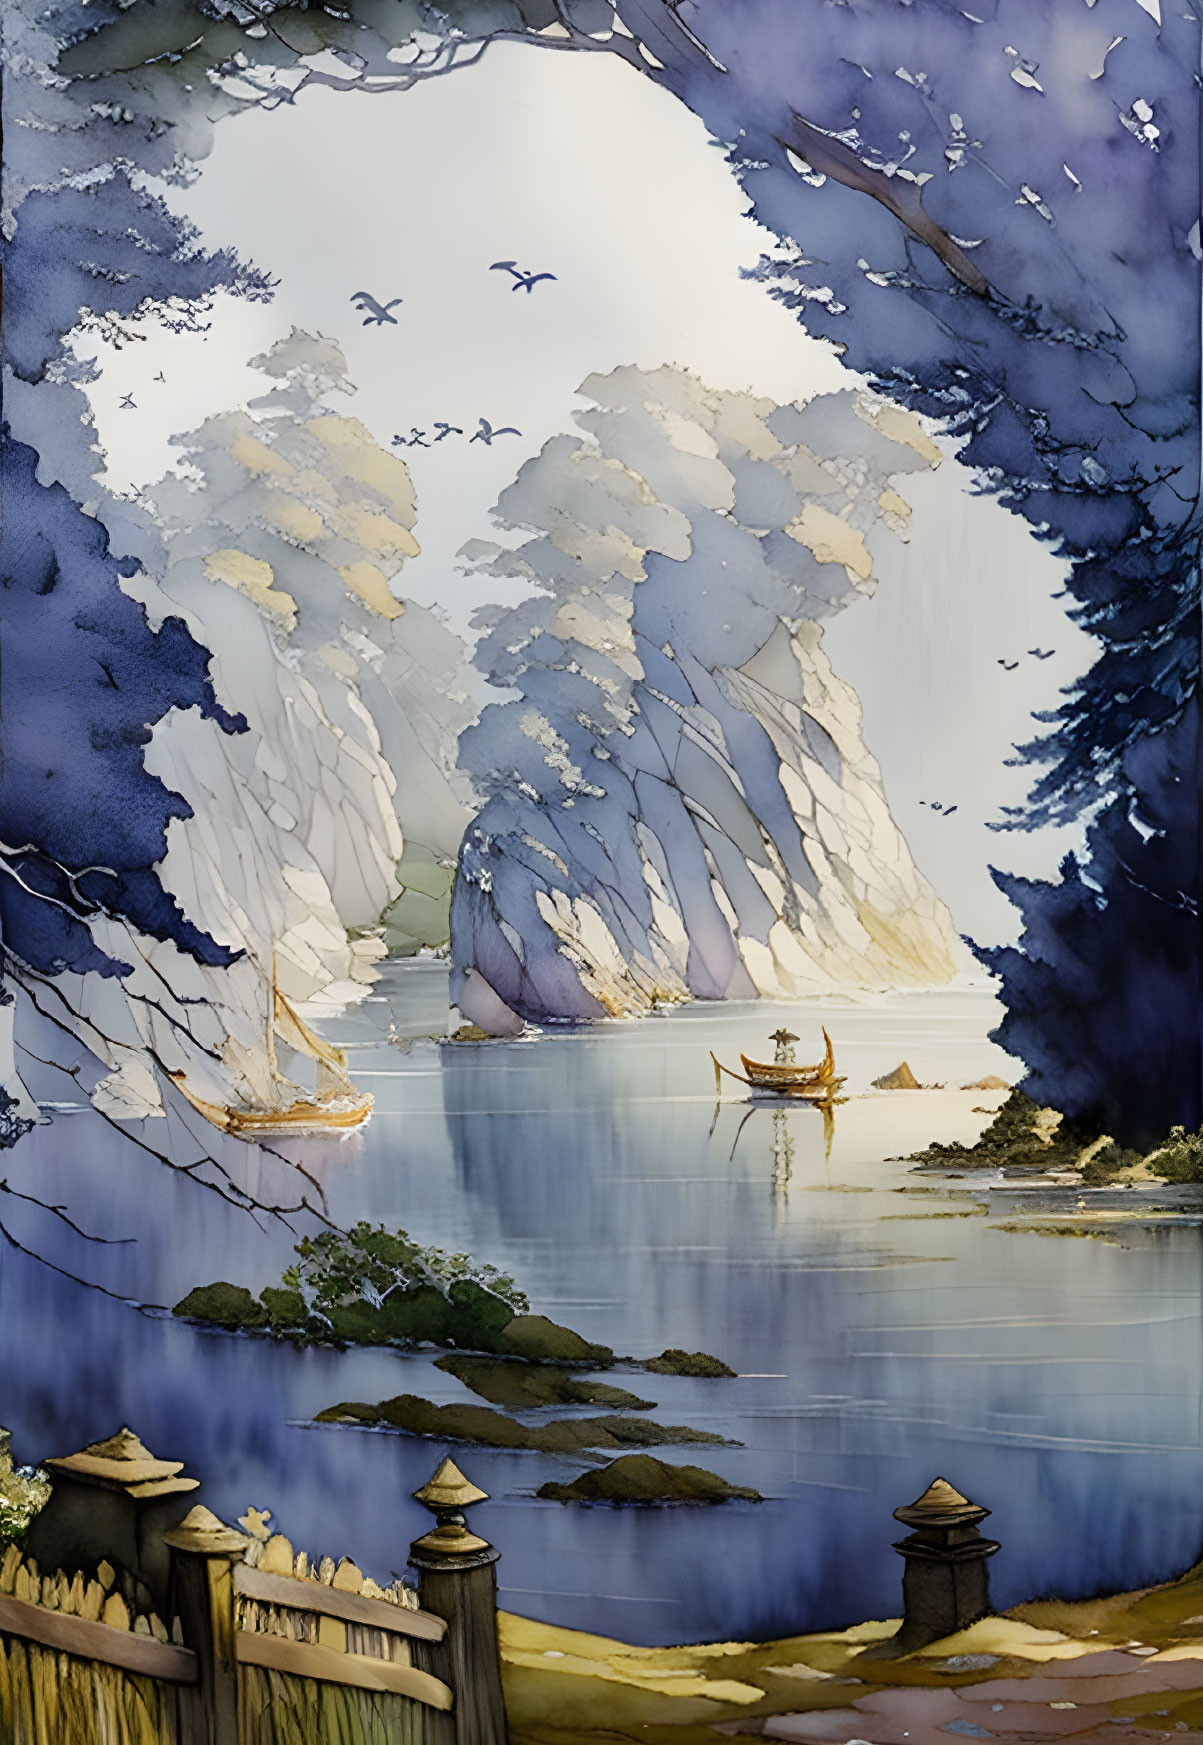 Tranquil river with boats, cliffs, trees, and birds in the sky